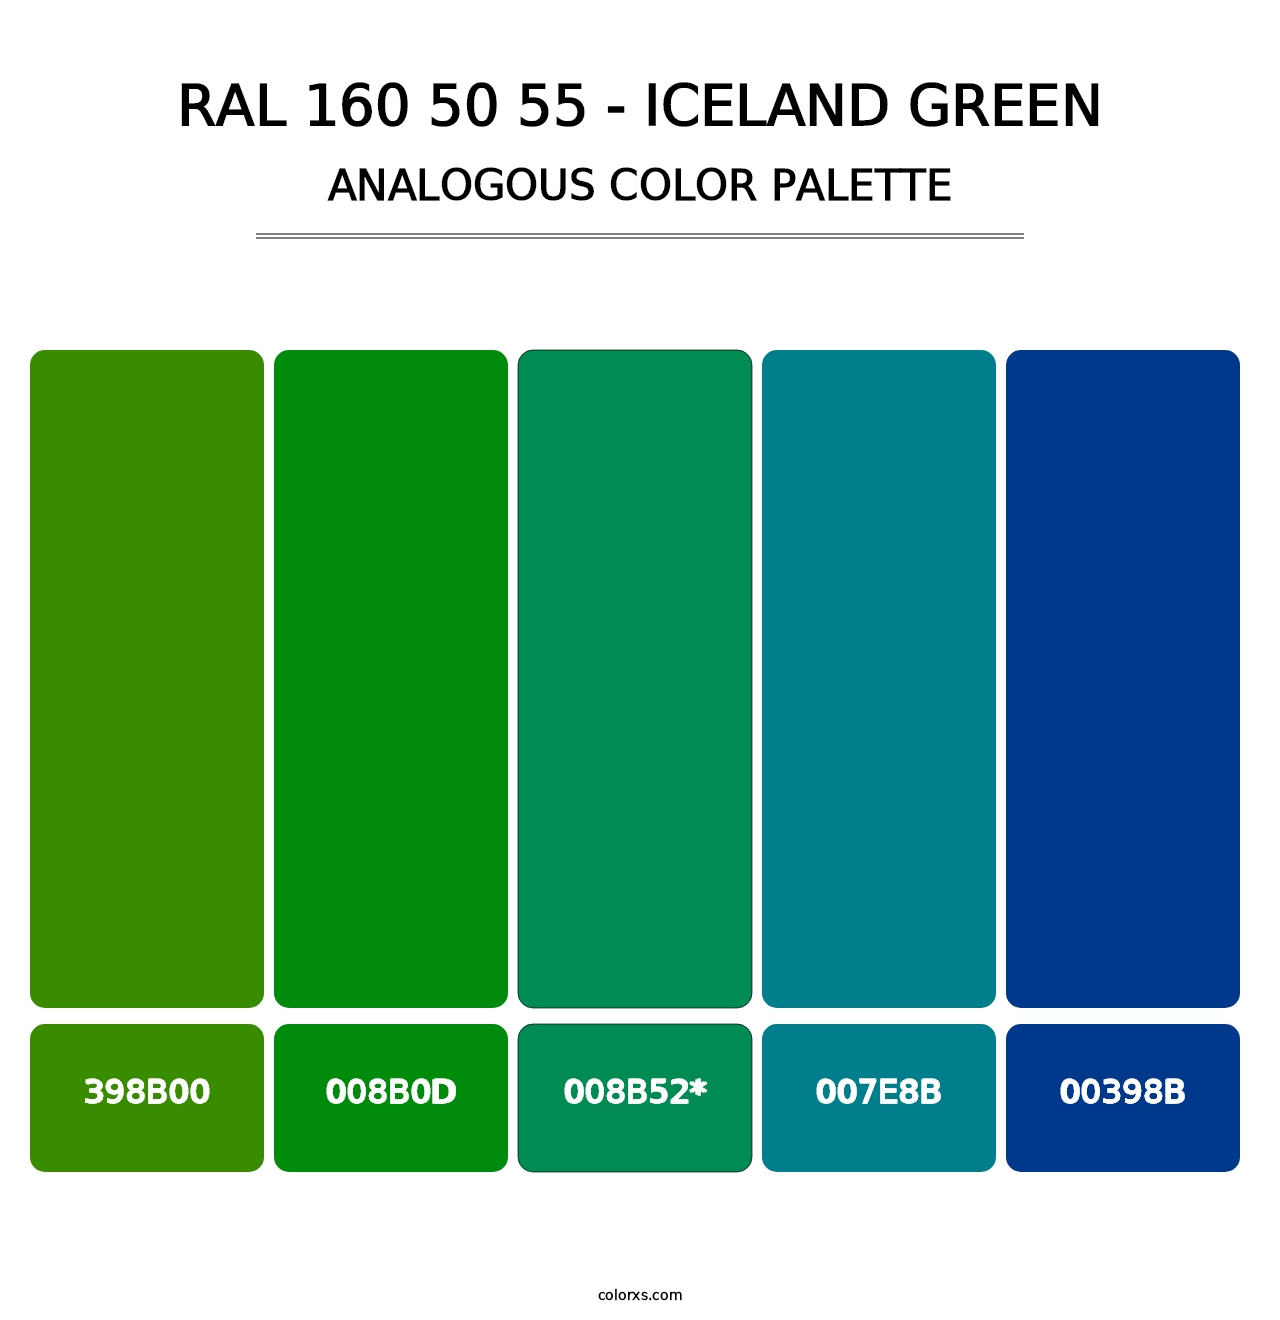 RAL 160 50 55 - Iceland Green - Analogous Color Palette